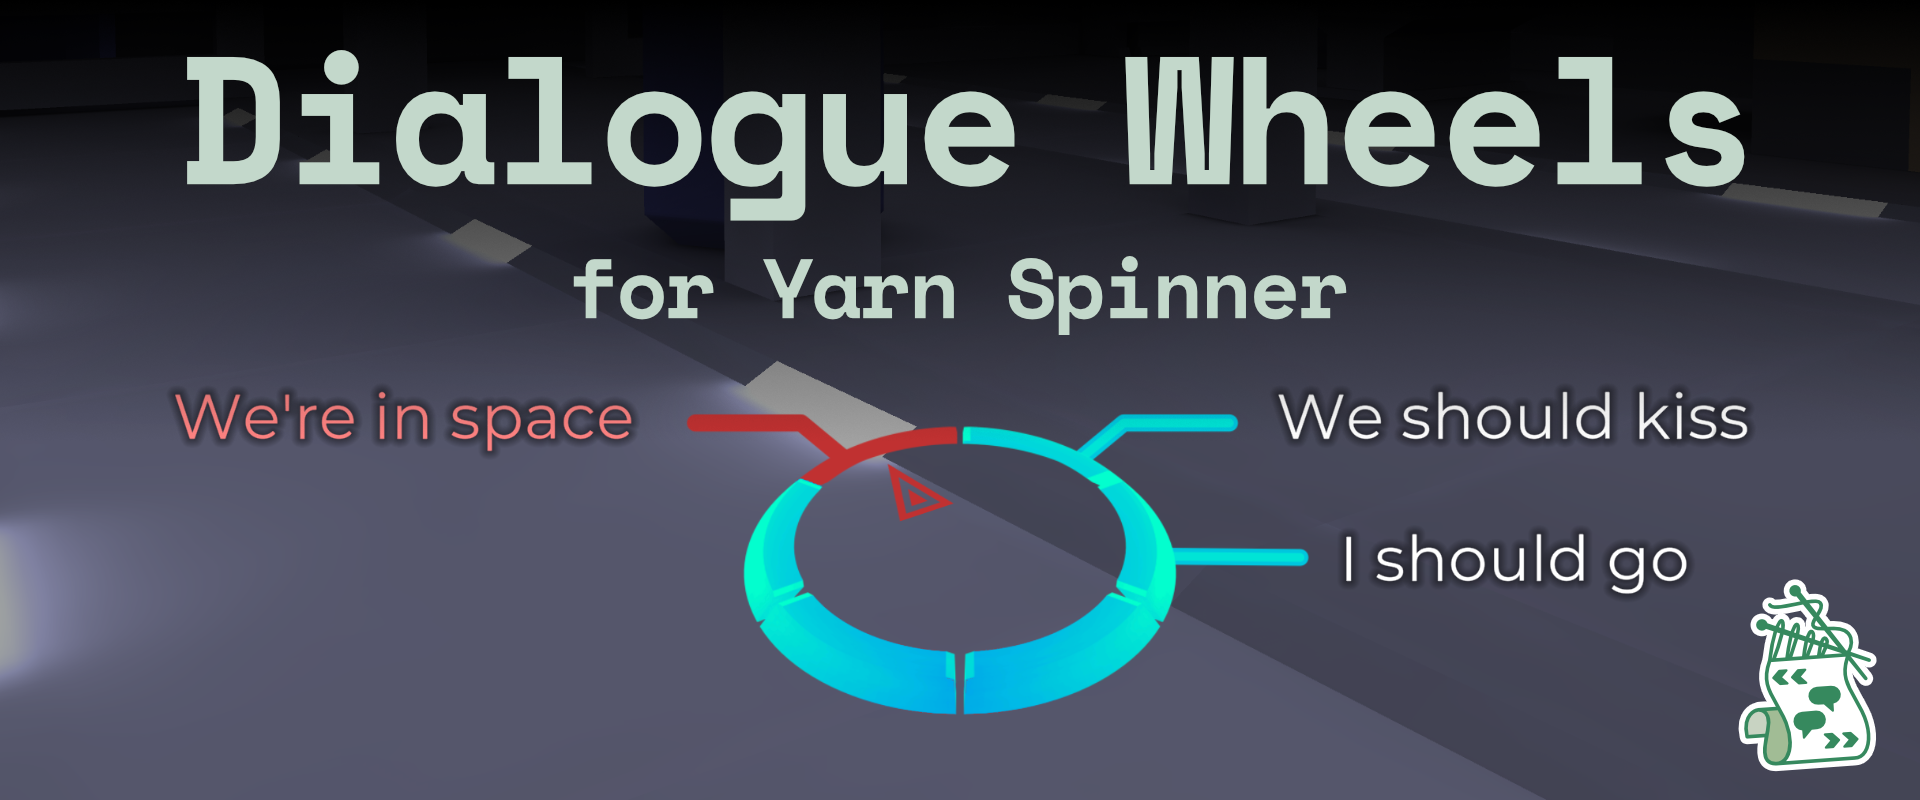 Dialogue Wheel for Yarn Spinner